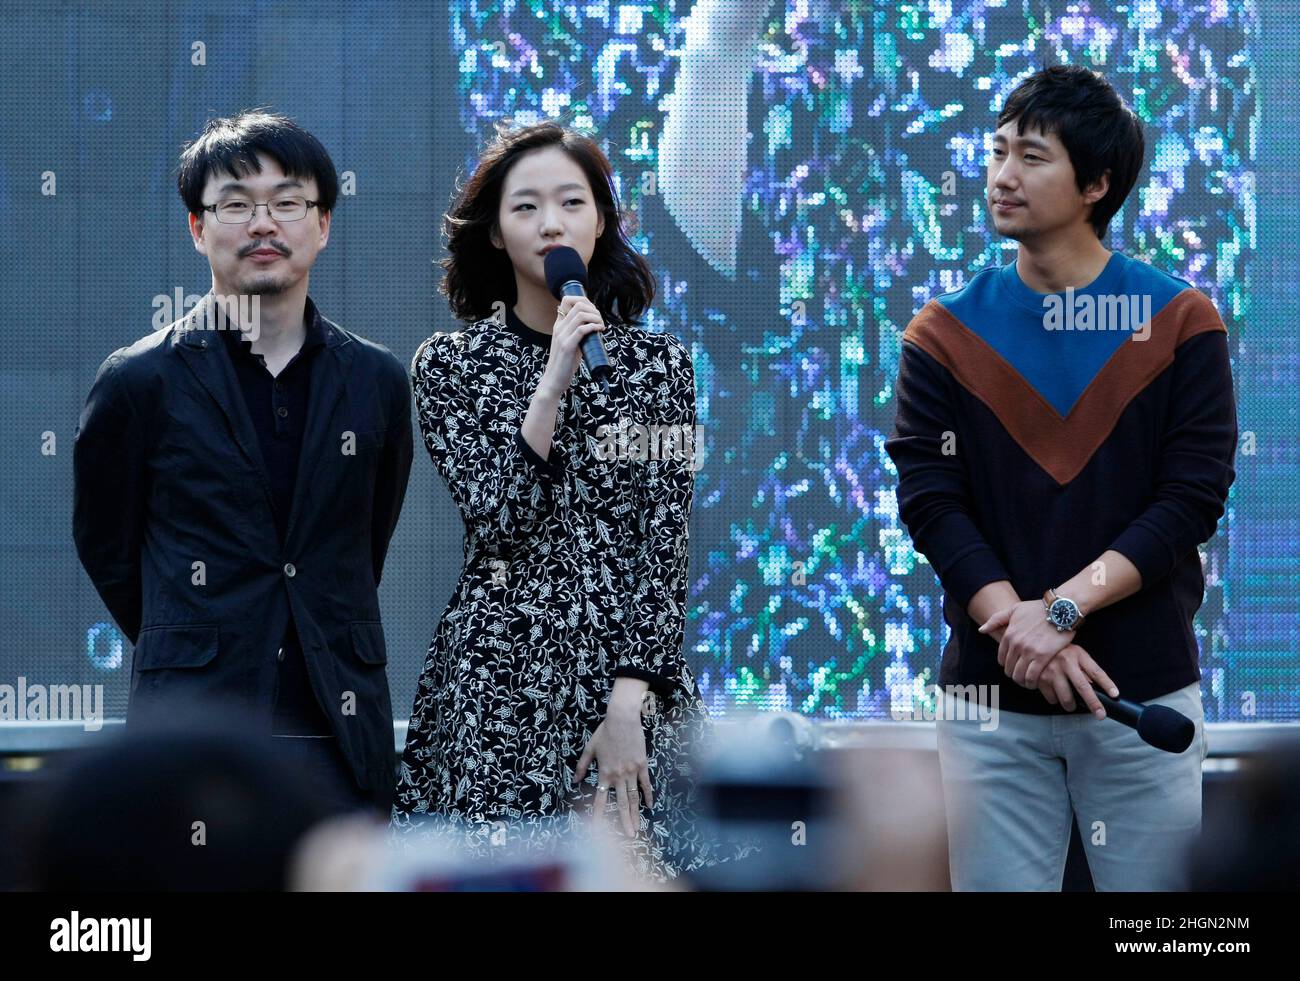 October 7, 2012 - Busan, South Korea : (From left) Director Chung Ji Woo, Actress Kim Go Eun and Actor Park Hae Il attend their film 'A Muse' Open stage event during the 17th Busan international Film Festival at the Nampodong BIFF district in Busan.  (Ryu Seung-il / Polaris) Stock Photo